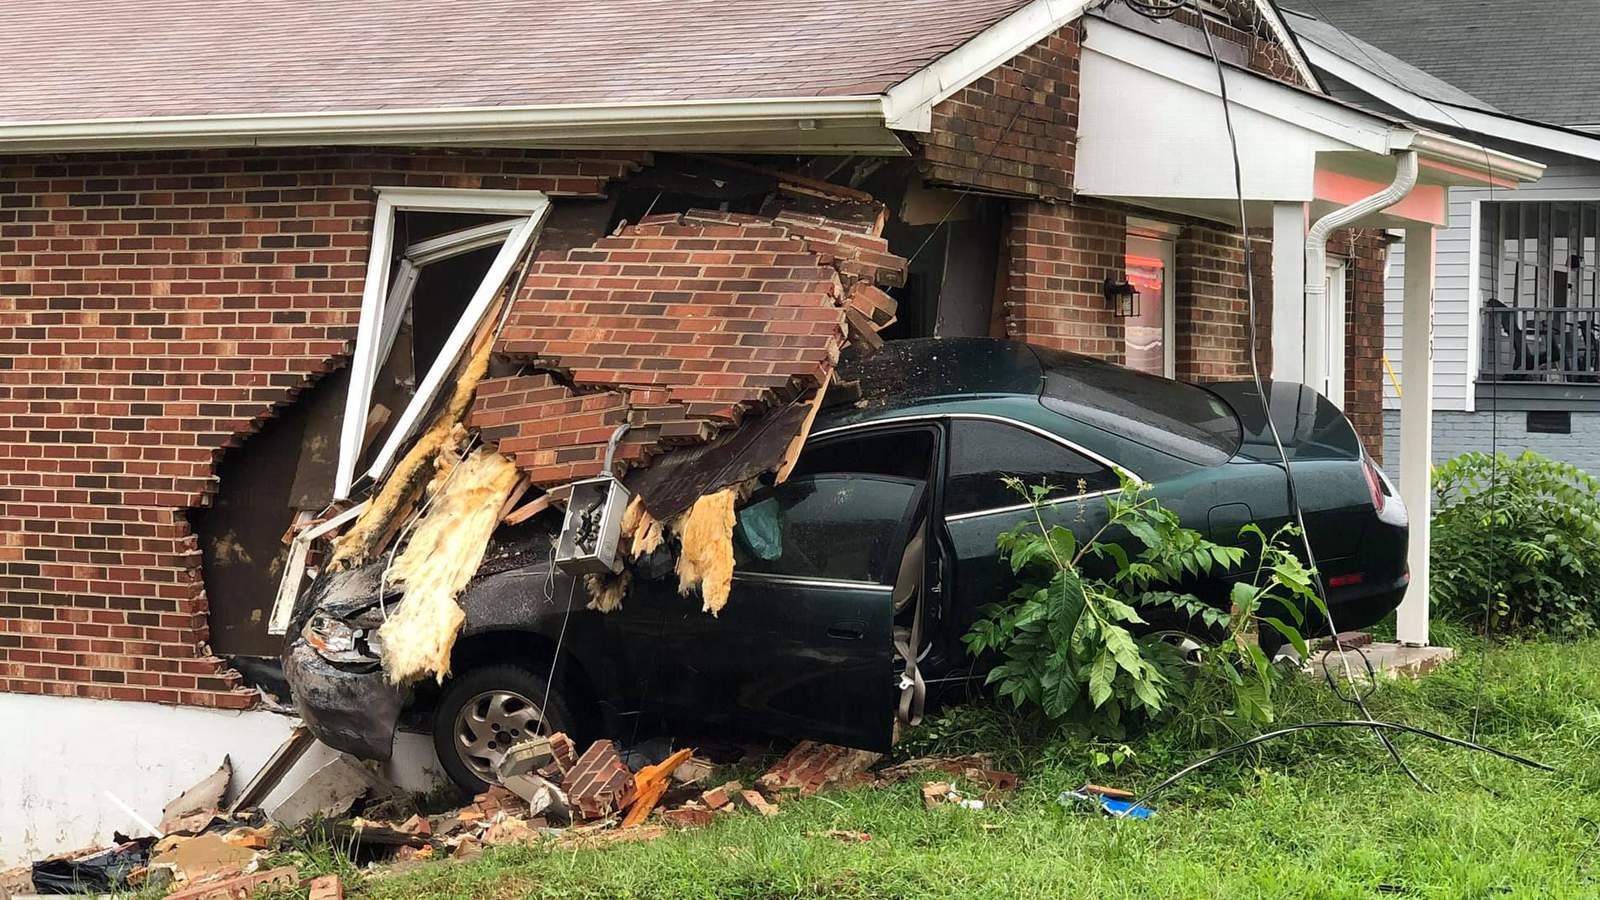 Danville firefighters respond after car crashes into house